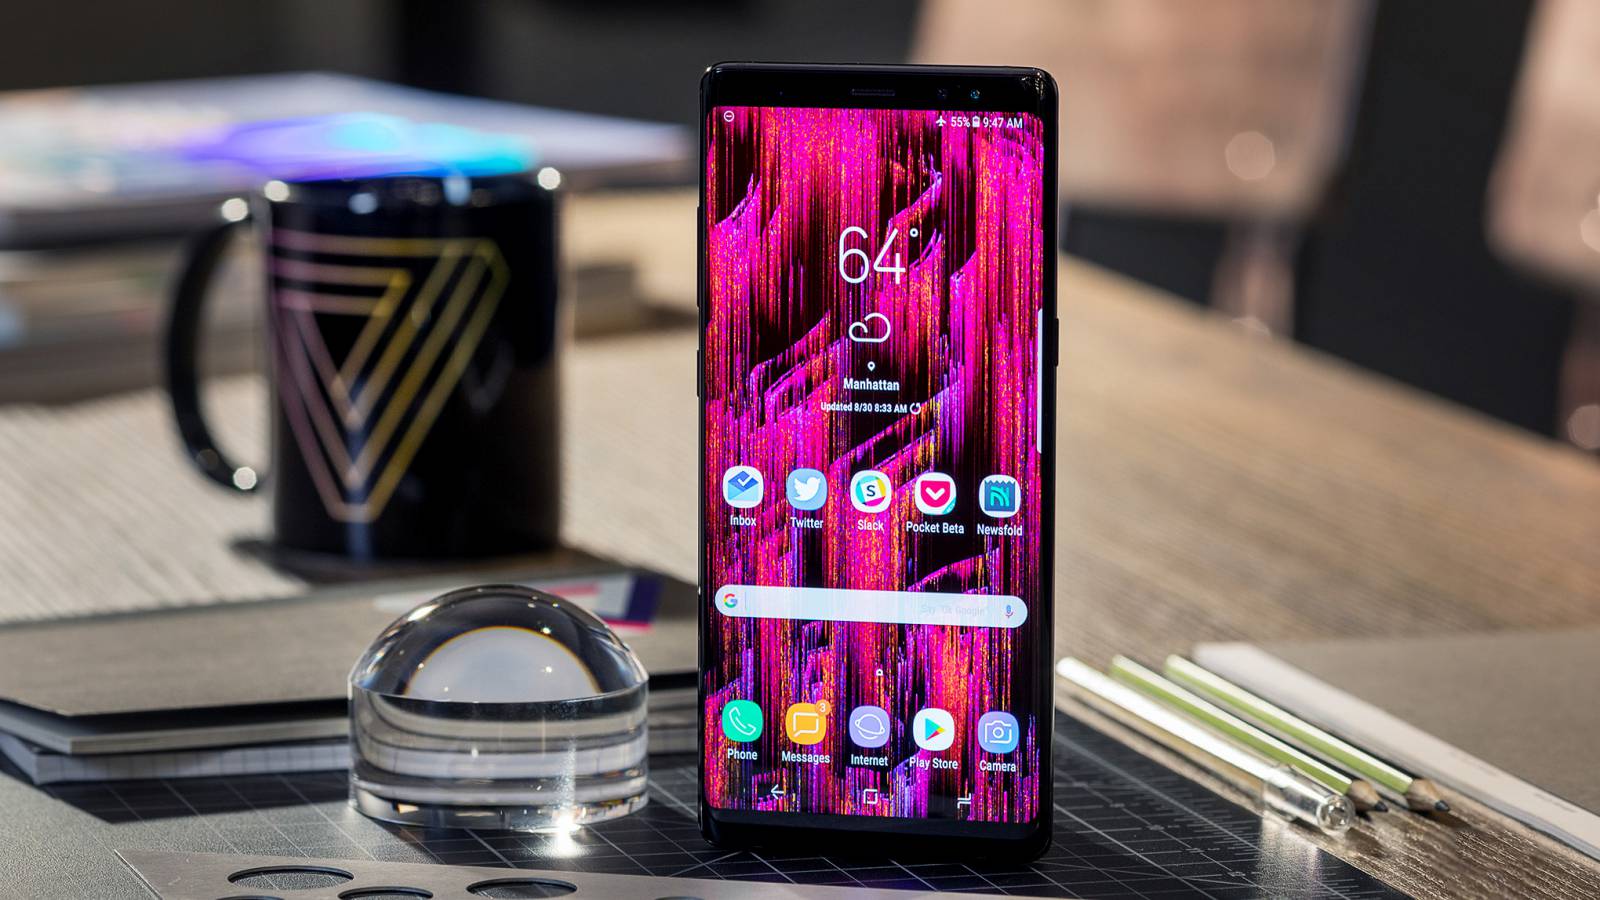 Samsung GALAXY NOTE 8 REDUCED at eMAG in the Weekend, Take advantage of the Offers